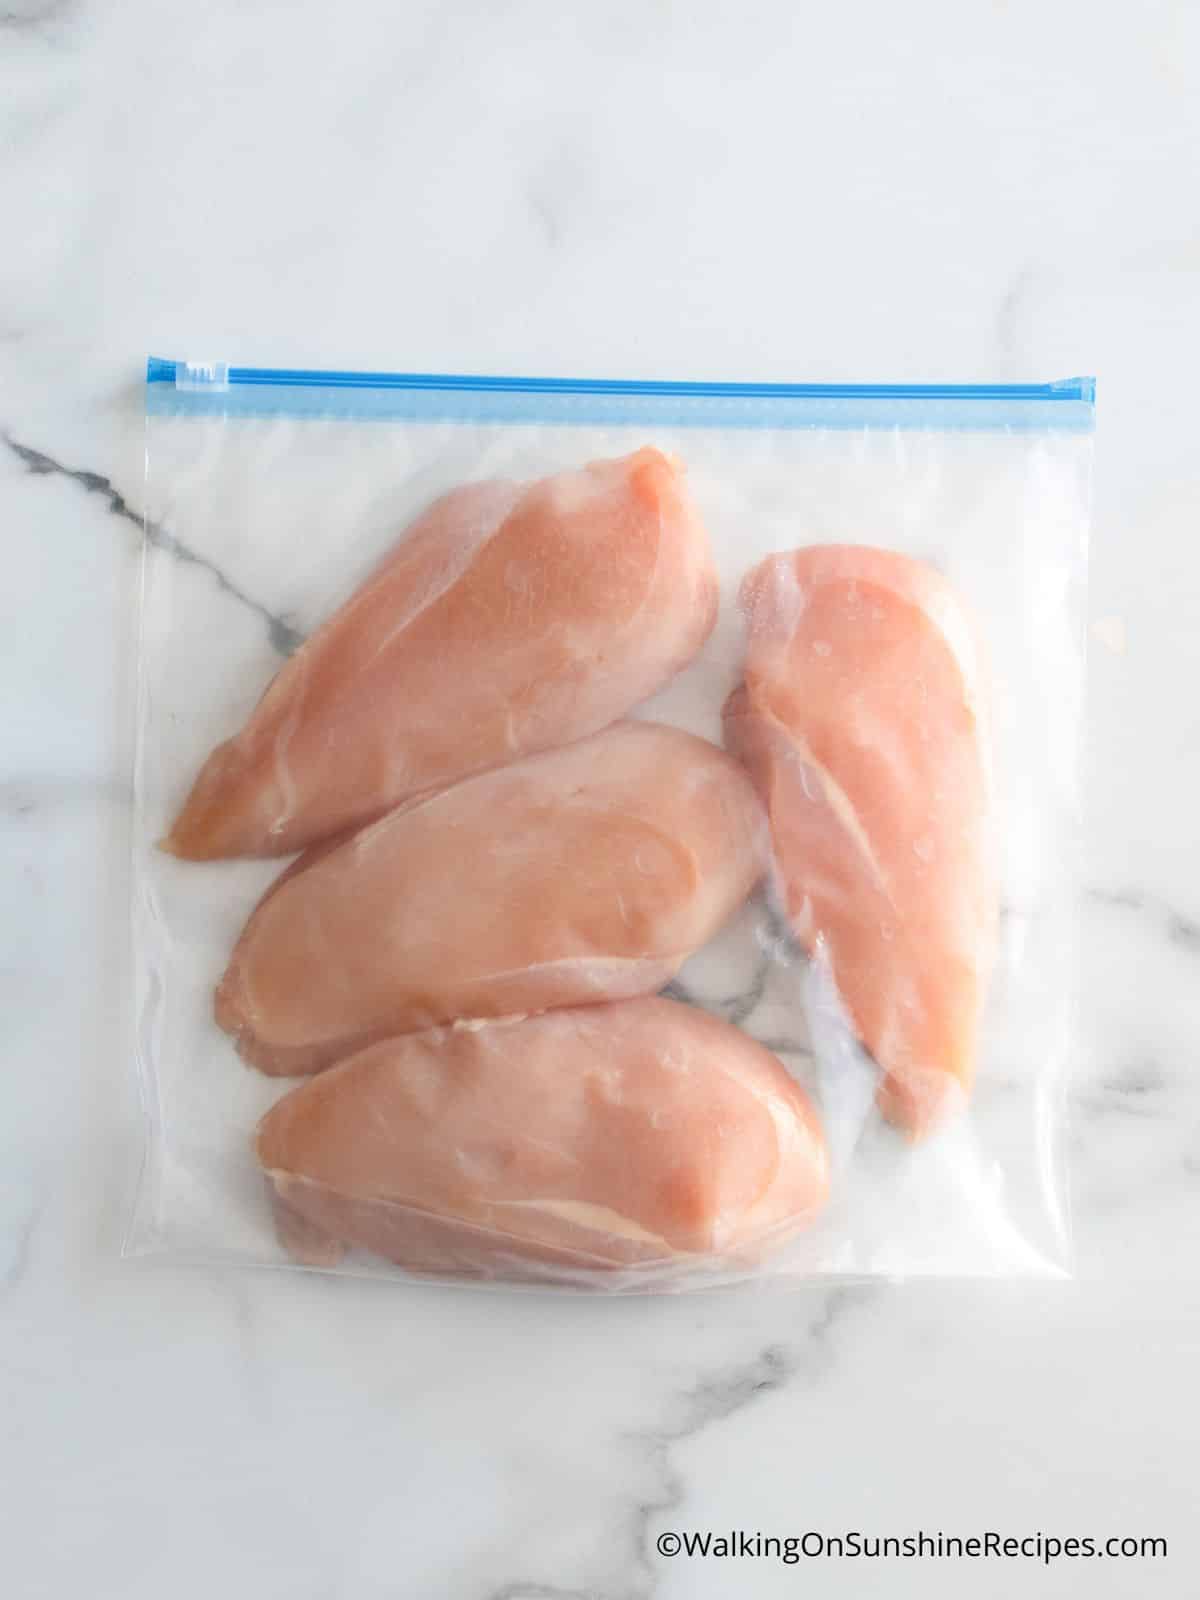 Add chicken cutlets to plastic bag for easy way to marinade or freeze chicken.